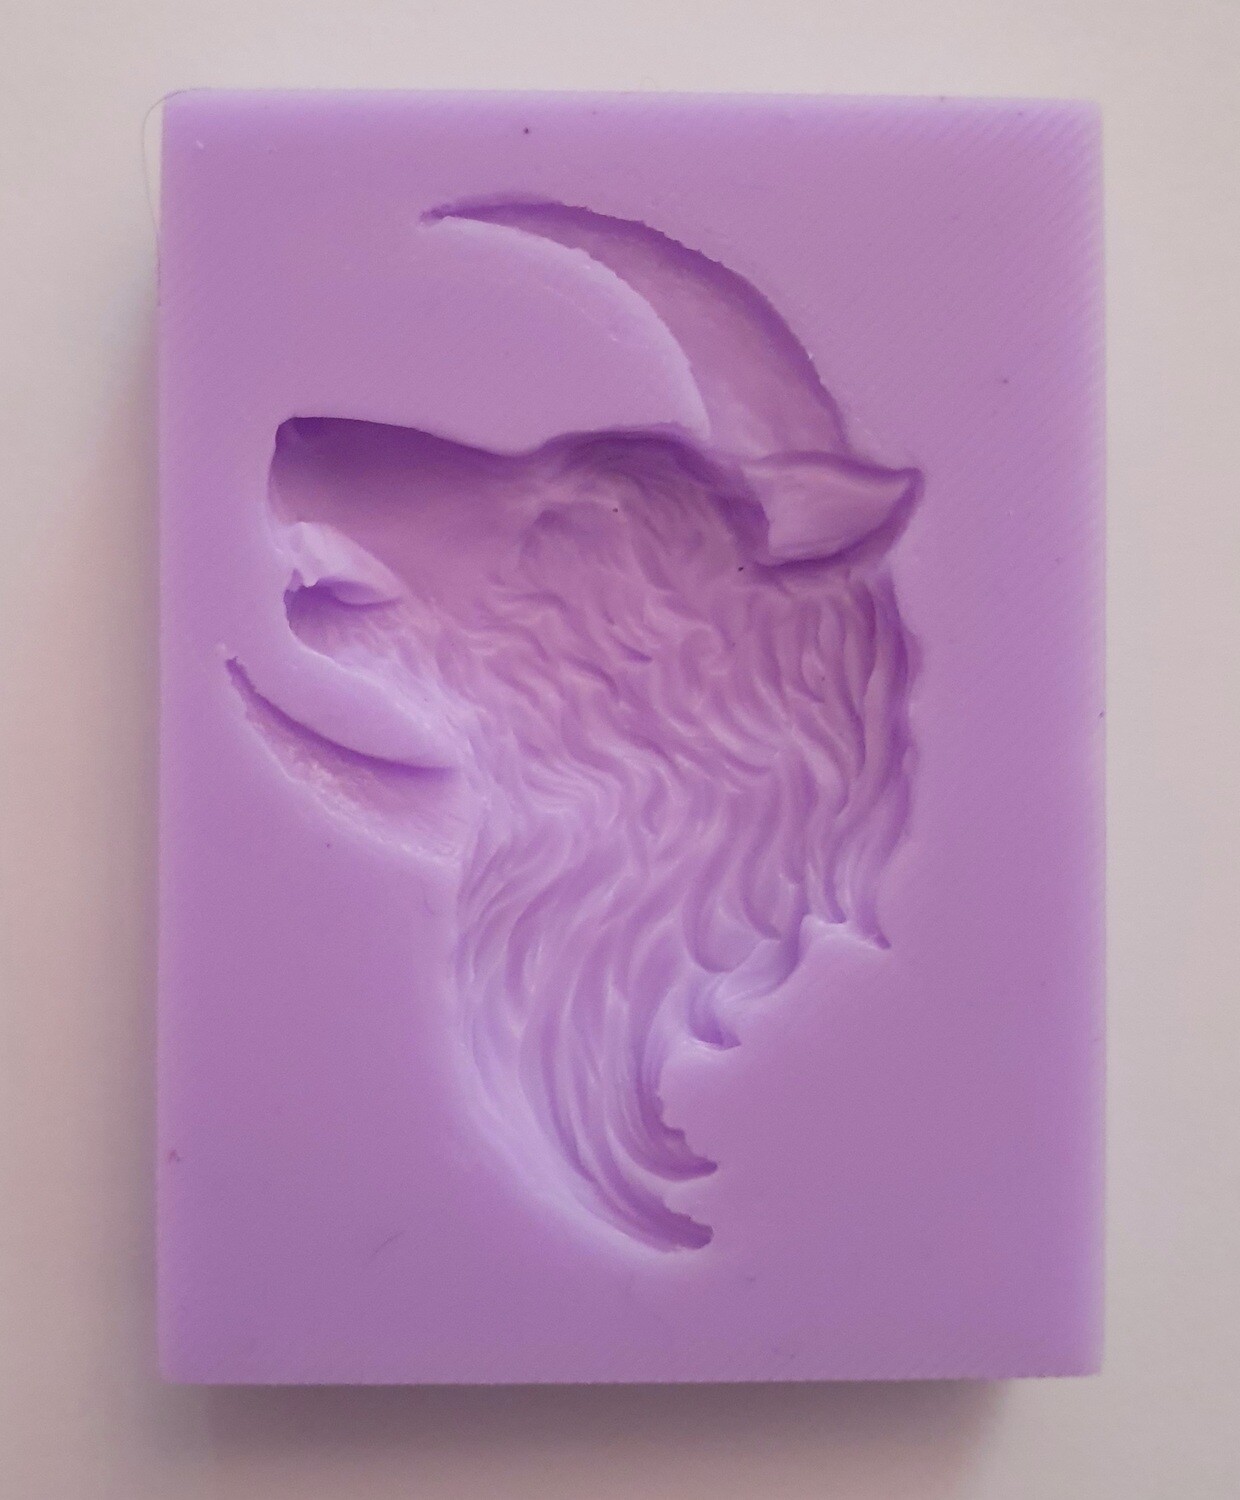 EMLEMS SMALL HALF MOON HOWLING WOLF FACE SILICONE MOULD